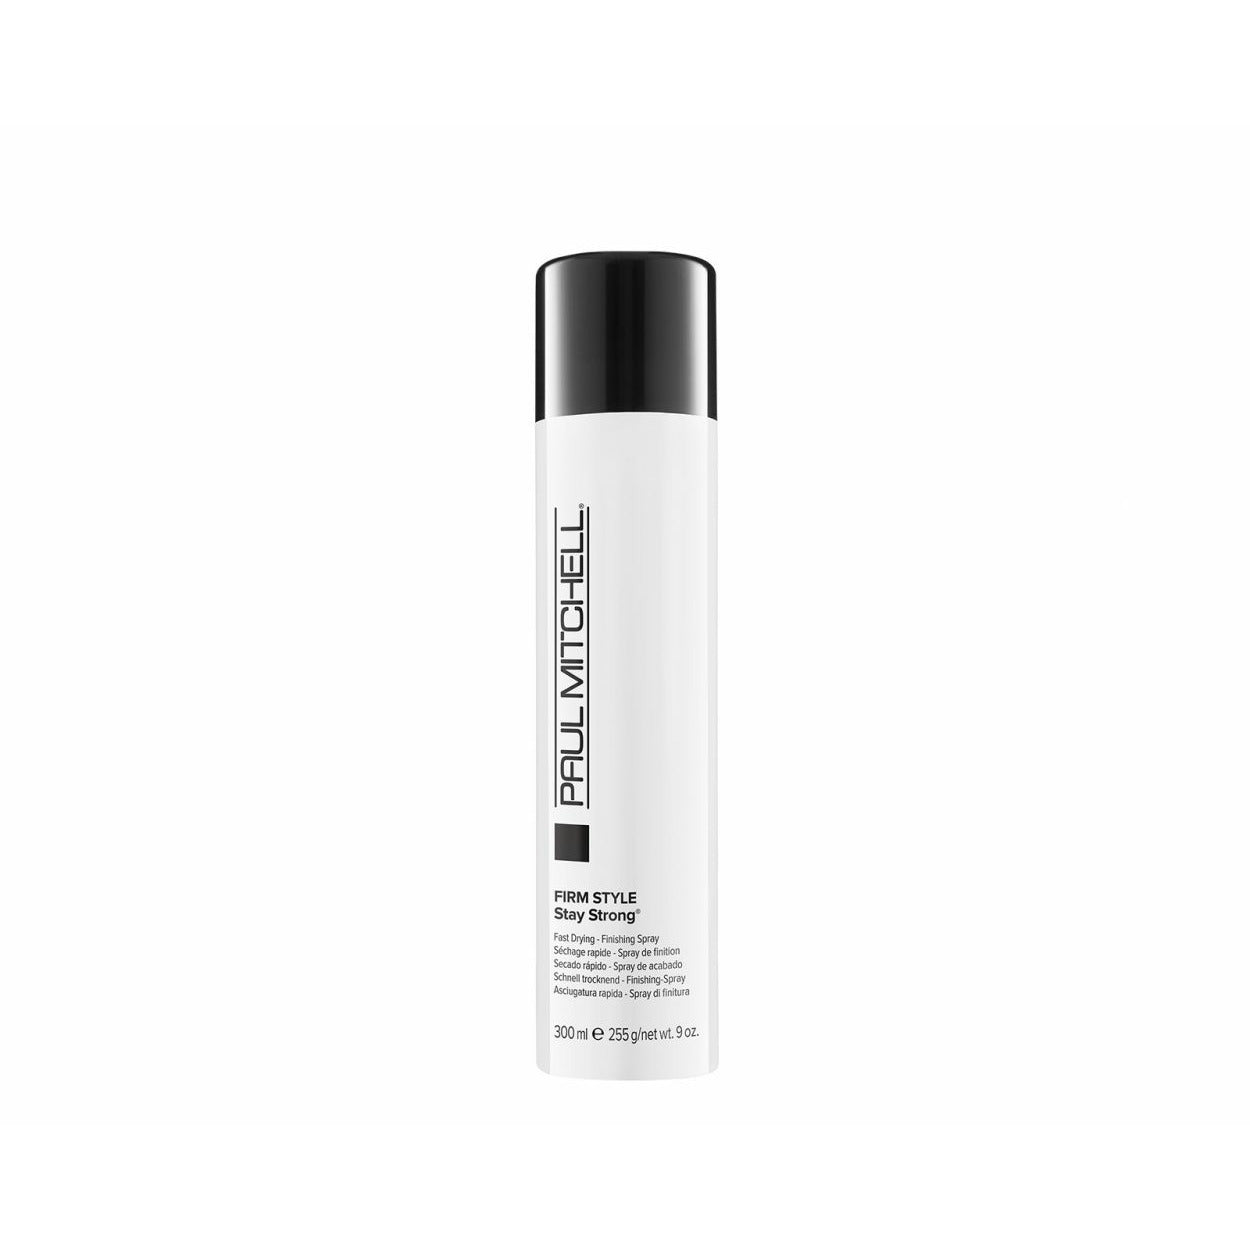 Paul Mitchell Firm Style Stay Strong Spray